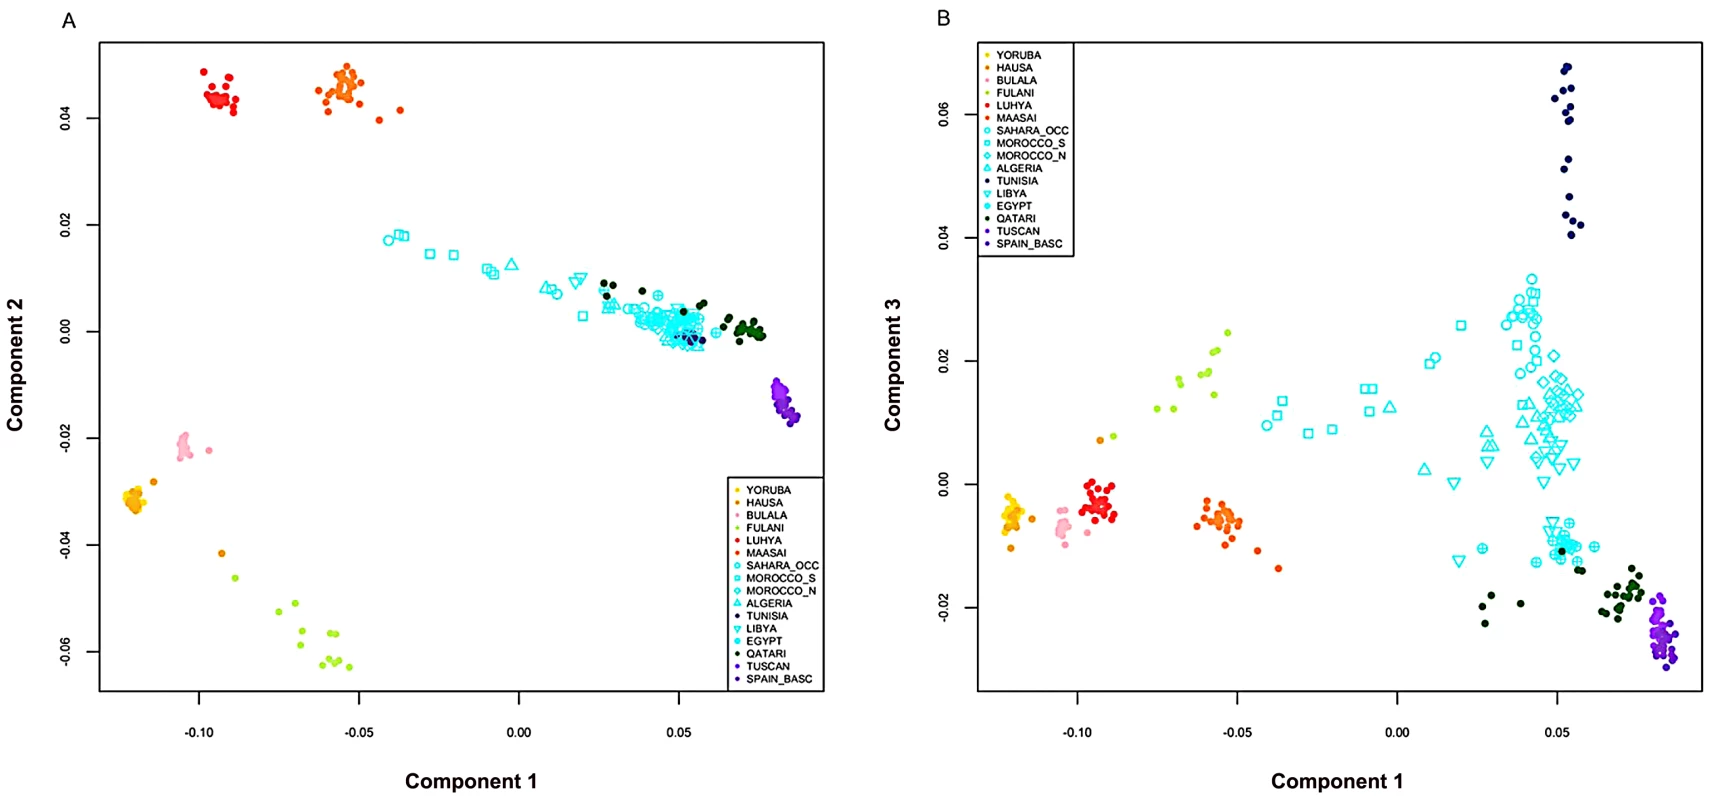 Multidimensional scaling components discriminating genetic clusters in Africa.